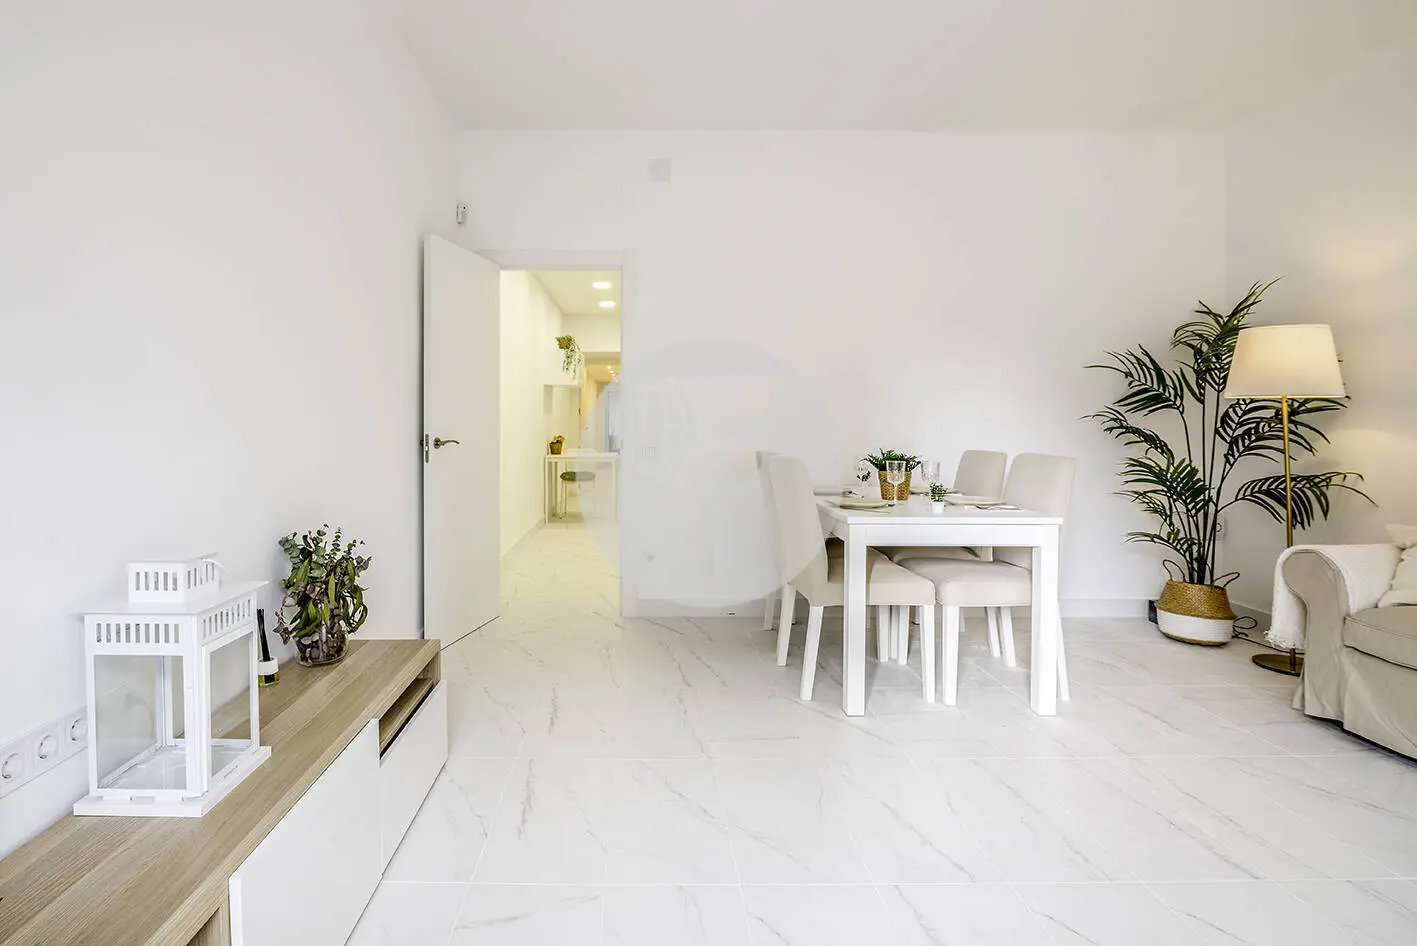 Brand new completely renovated apartment on Aragó street in the heart of El Clot in Barcelona. 11